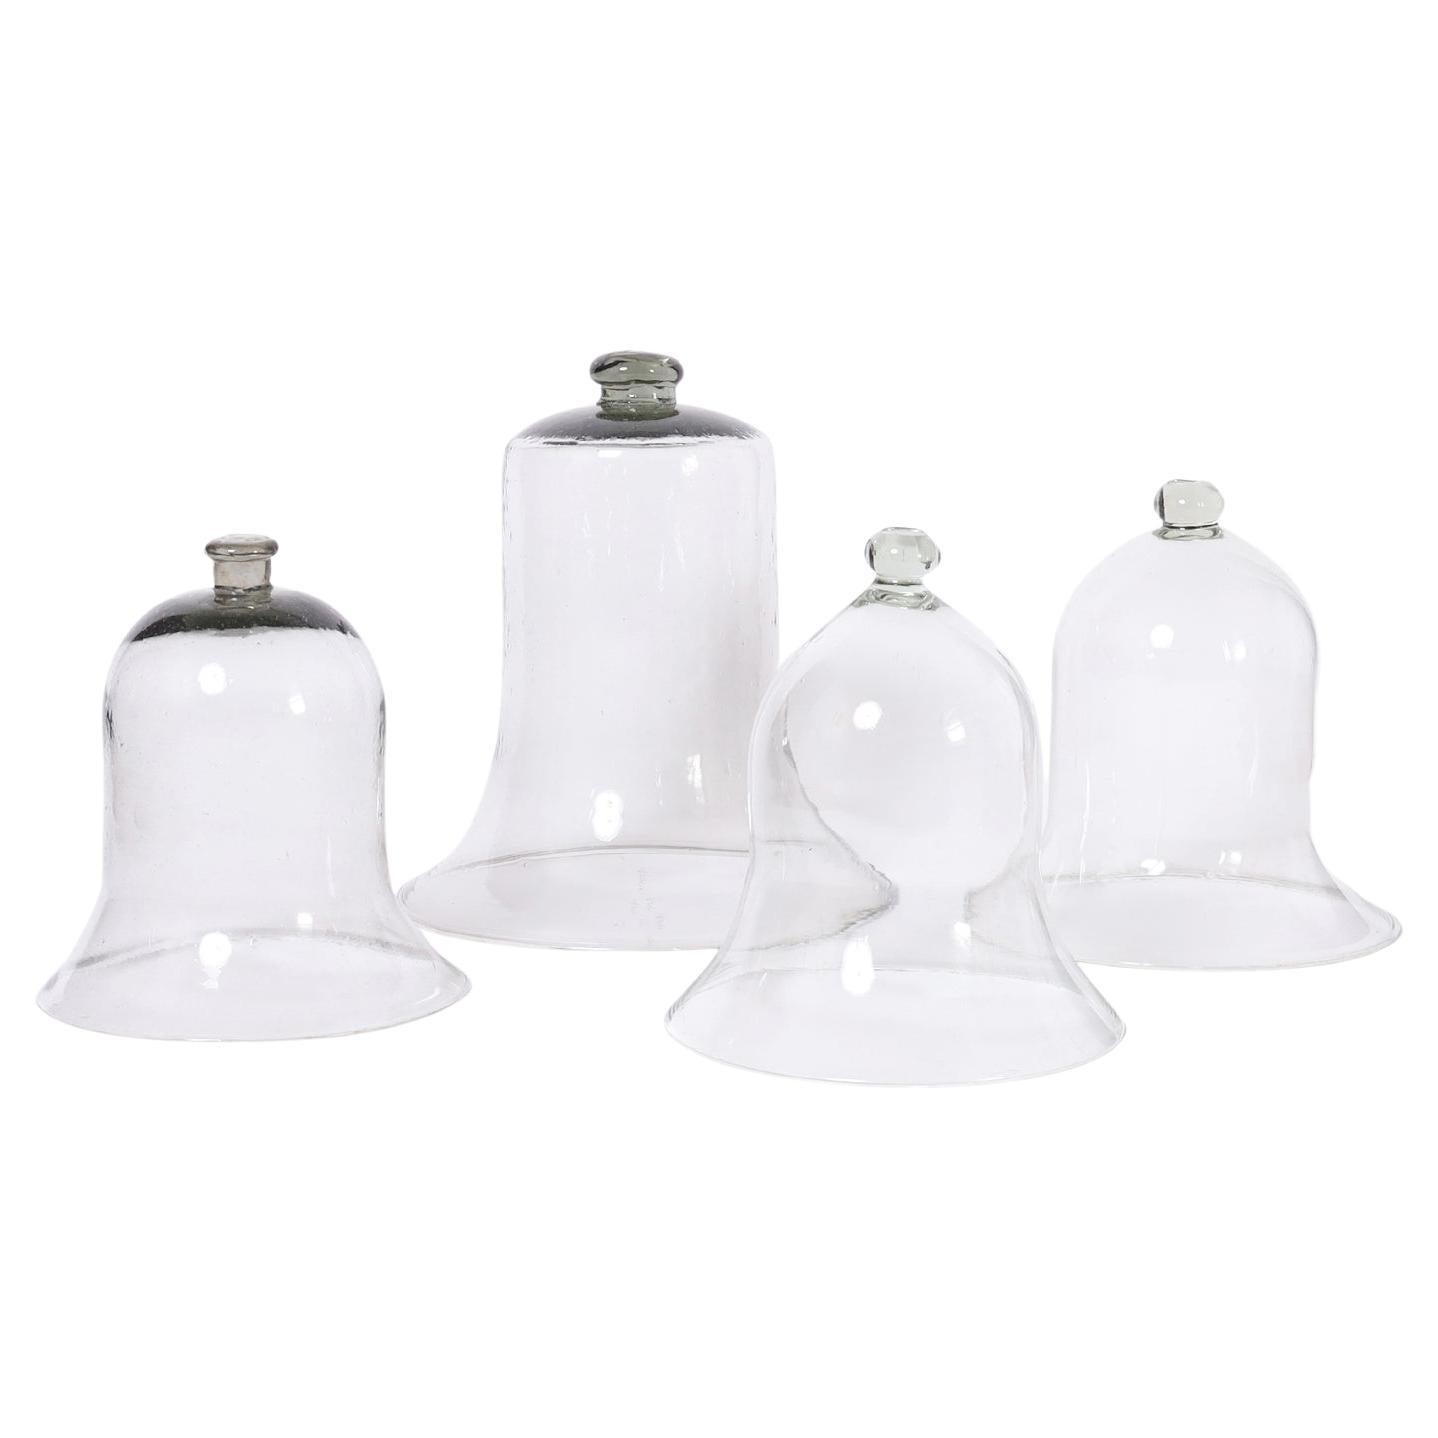 Set of Four Glass Garden Cloches Inbox, Priced Individually For Sale